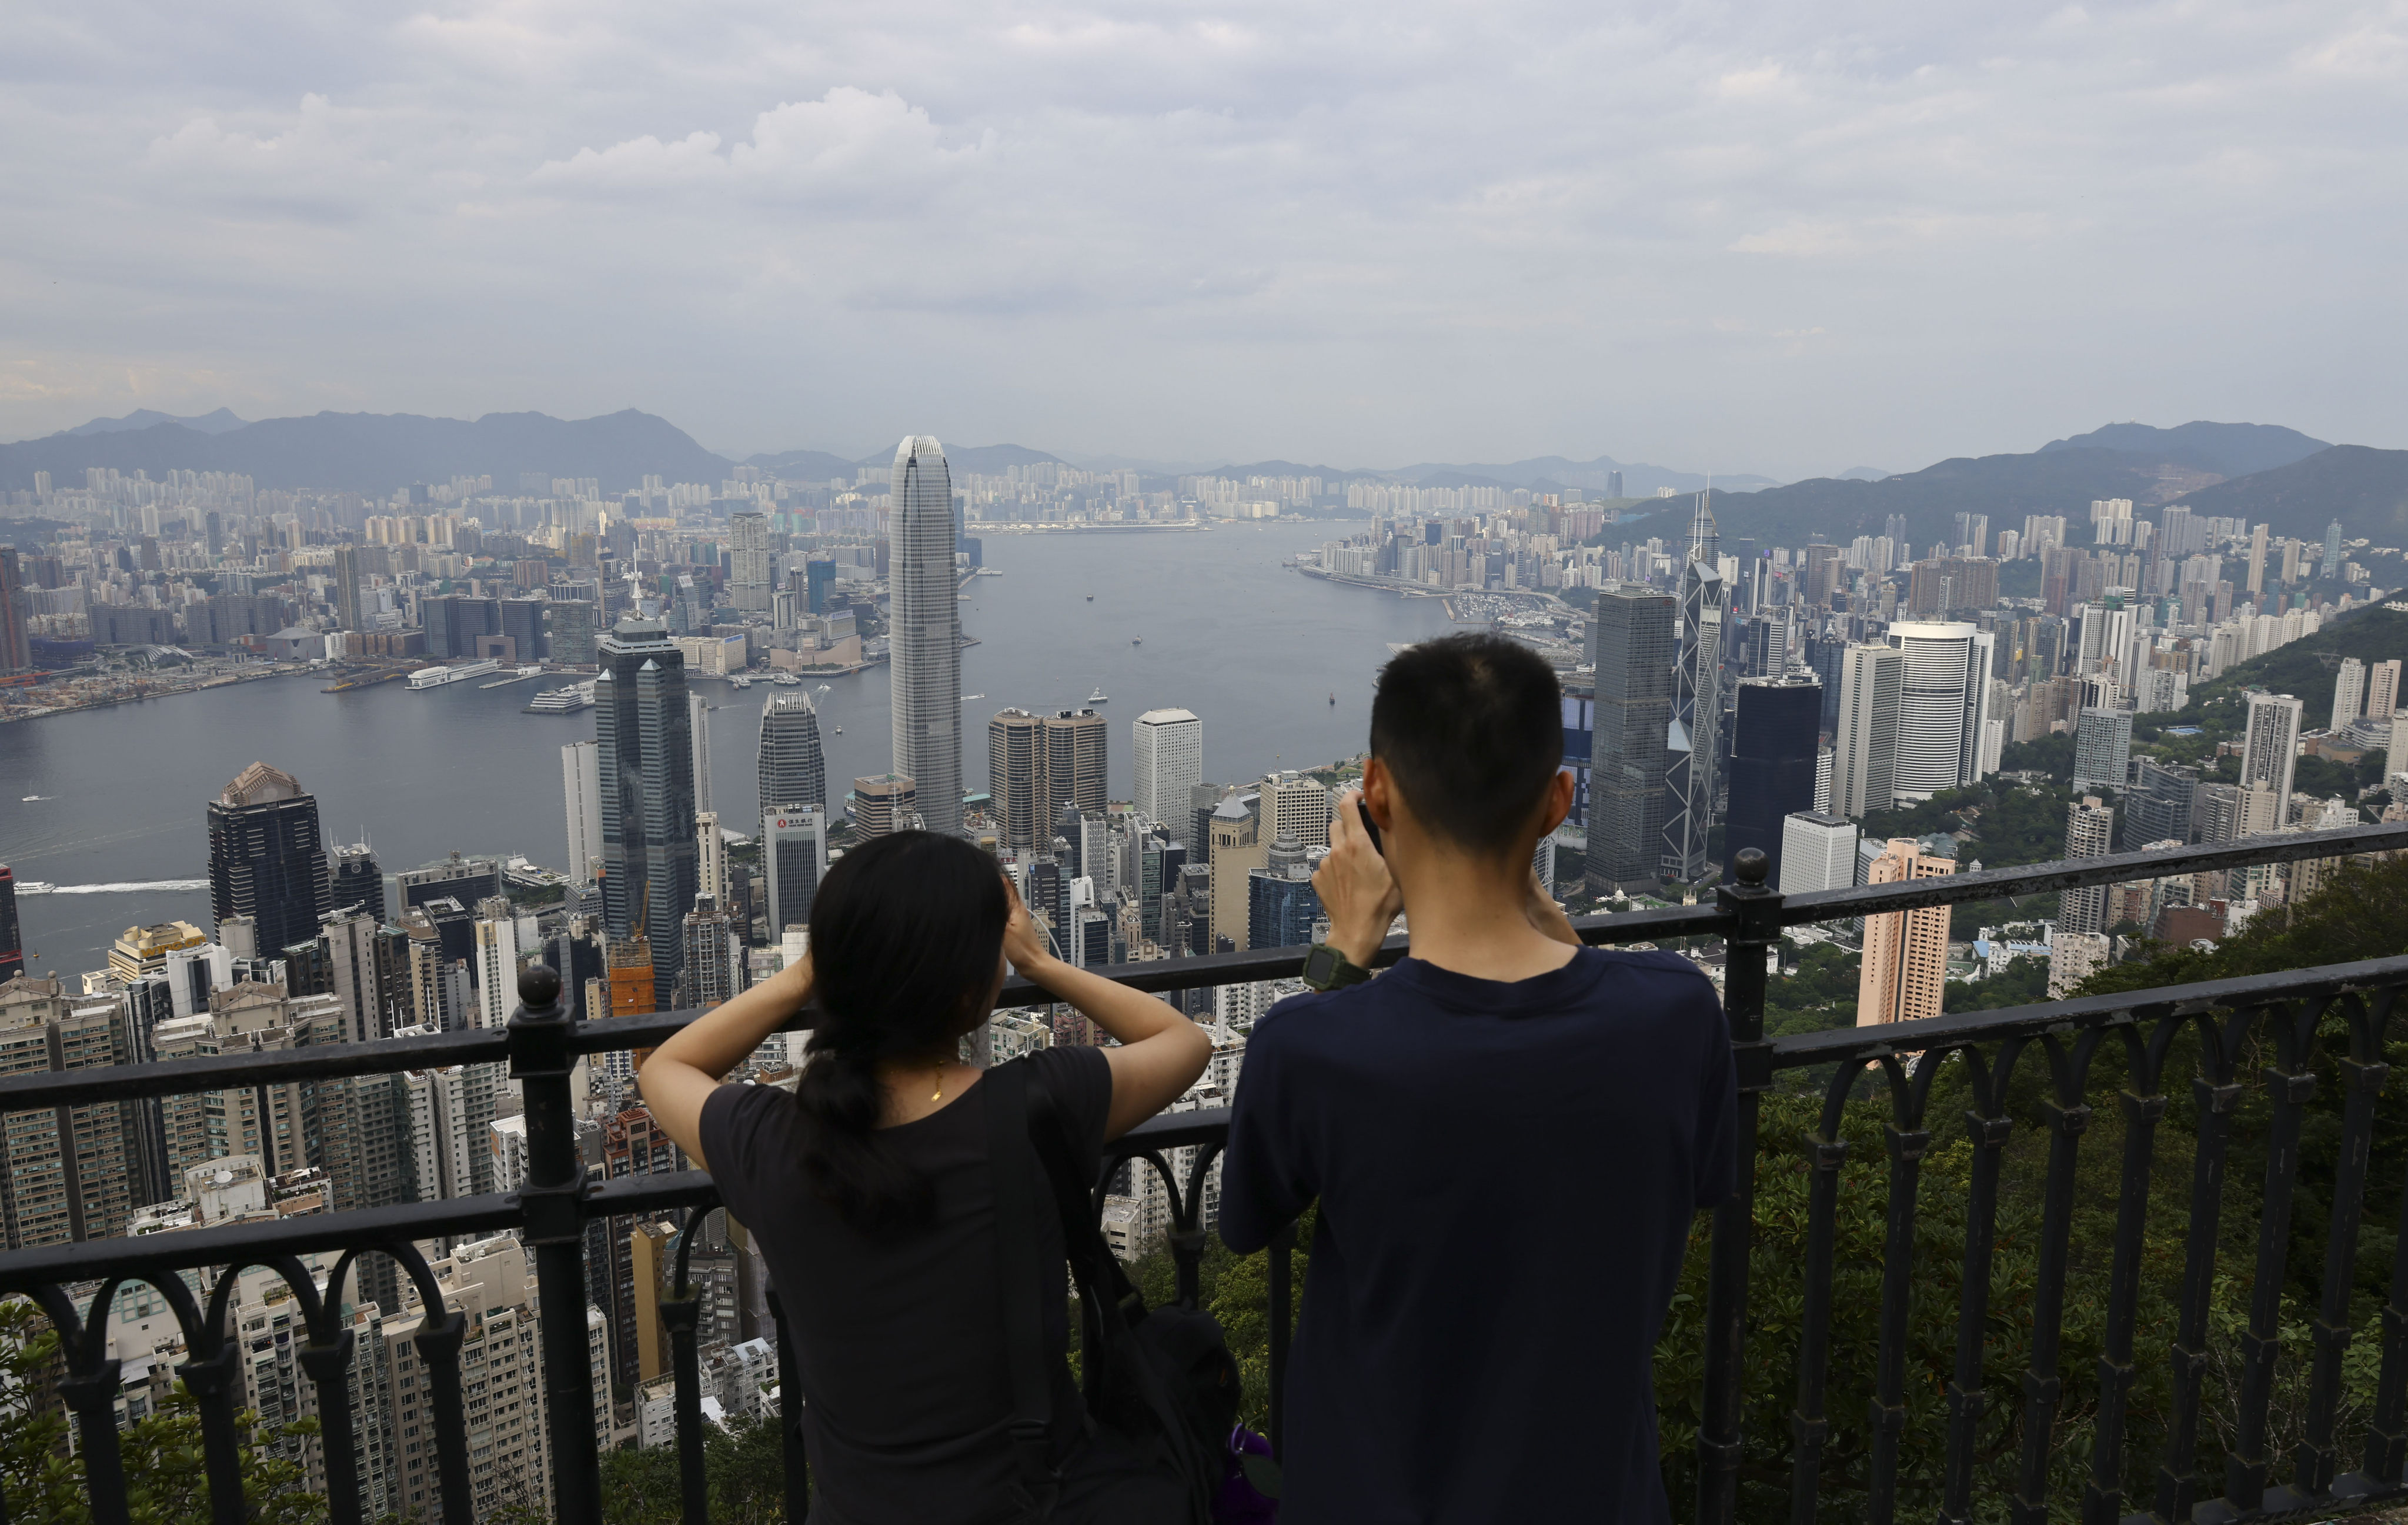 Tourists take photographs of the Hong Kong skyline from the Peak on July 27. Photo: Dickson Lee